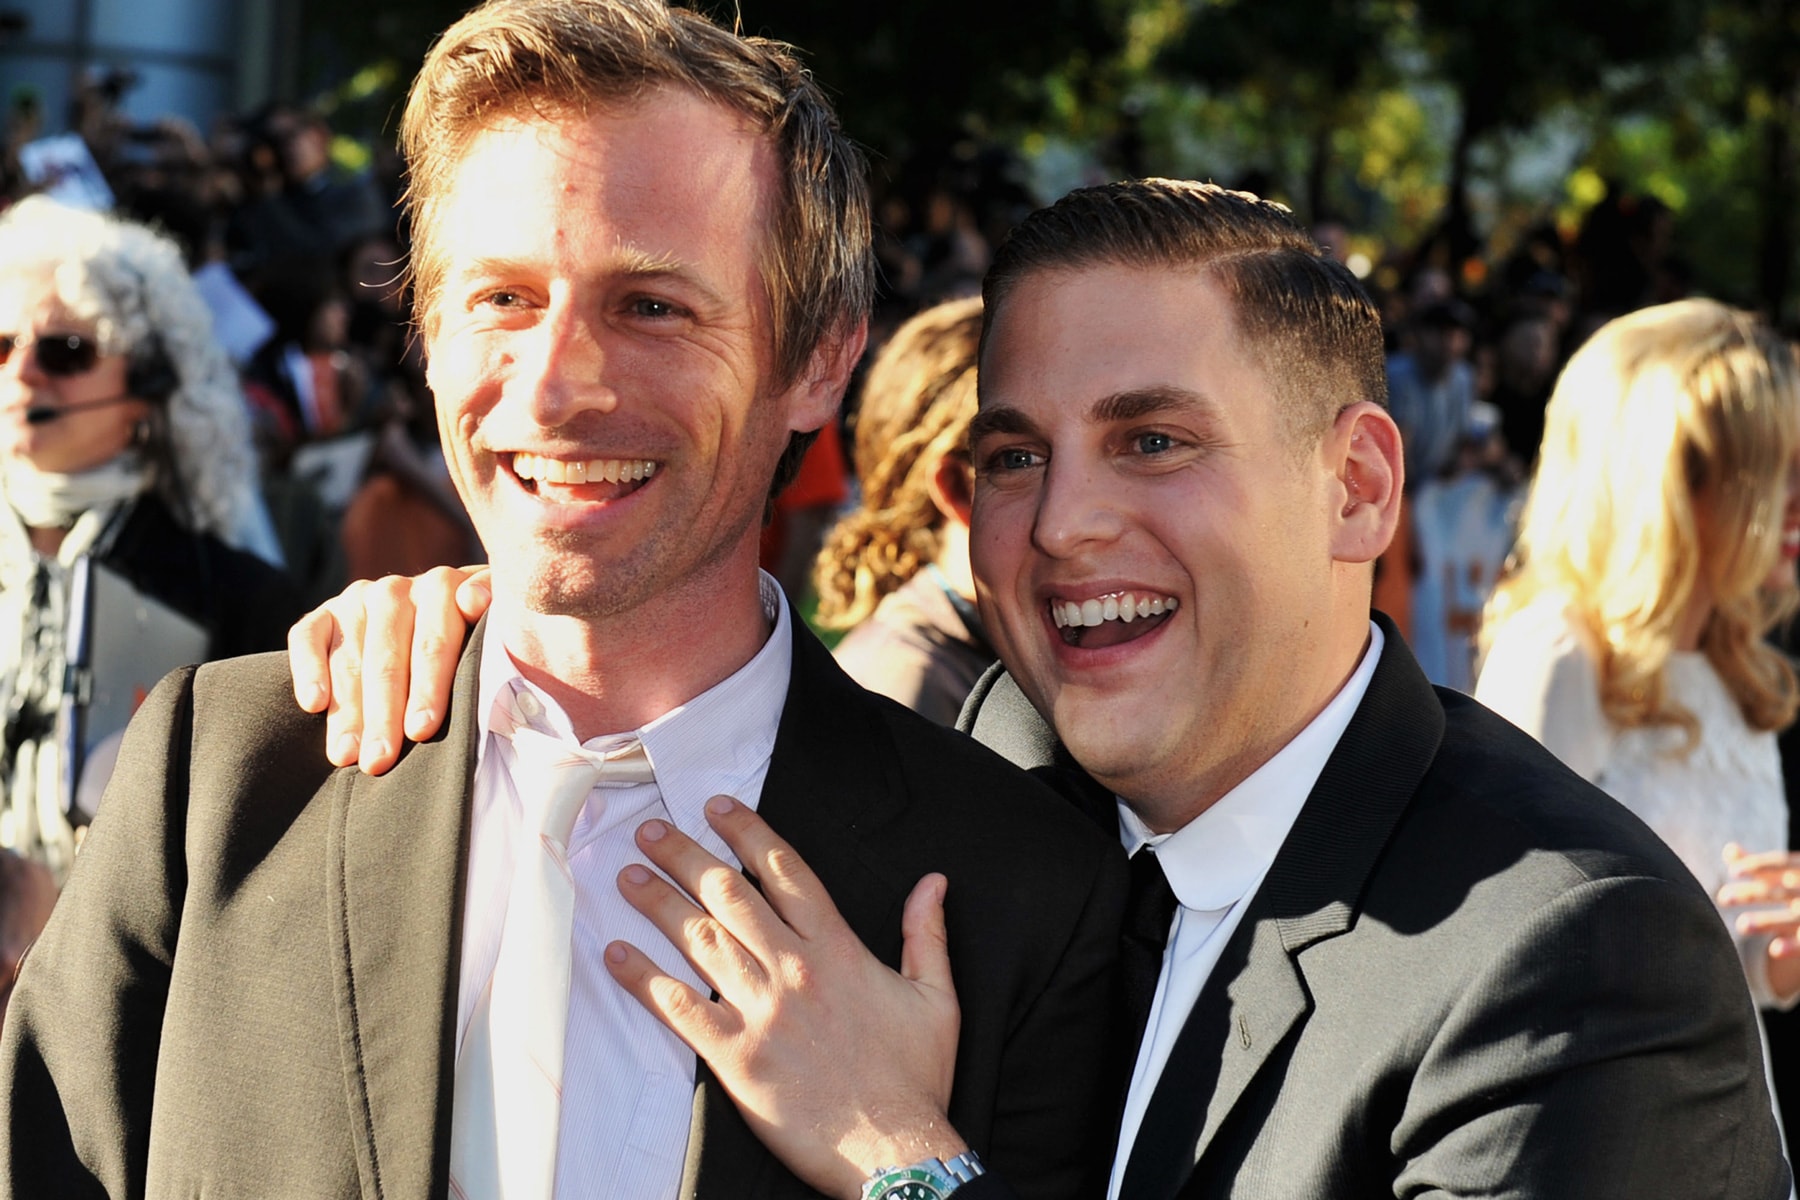 Jonah Hill & Spike Jonze Creating Beastie Boys Project live stage show